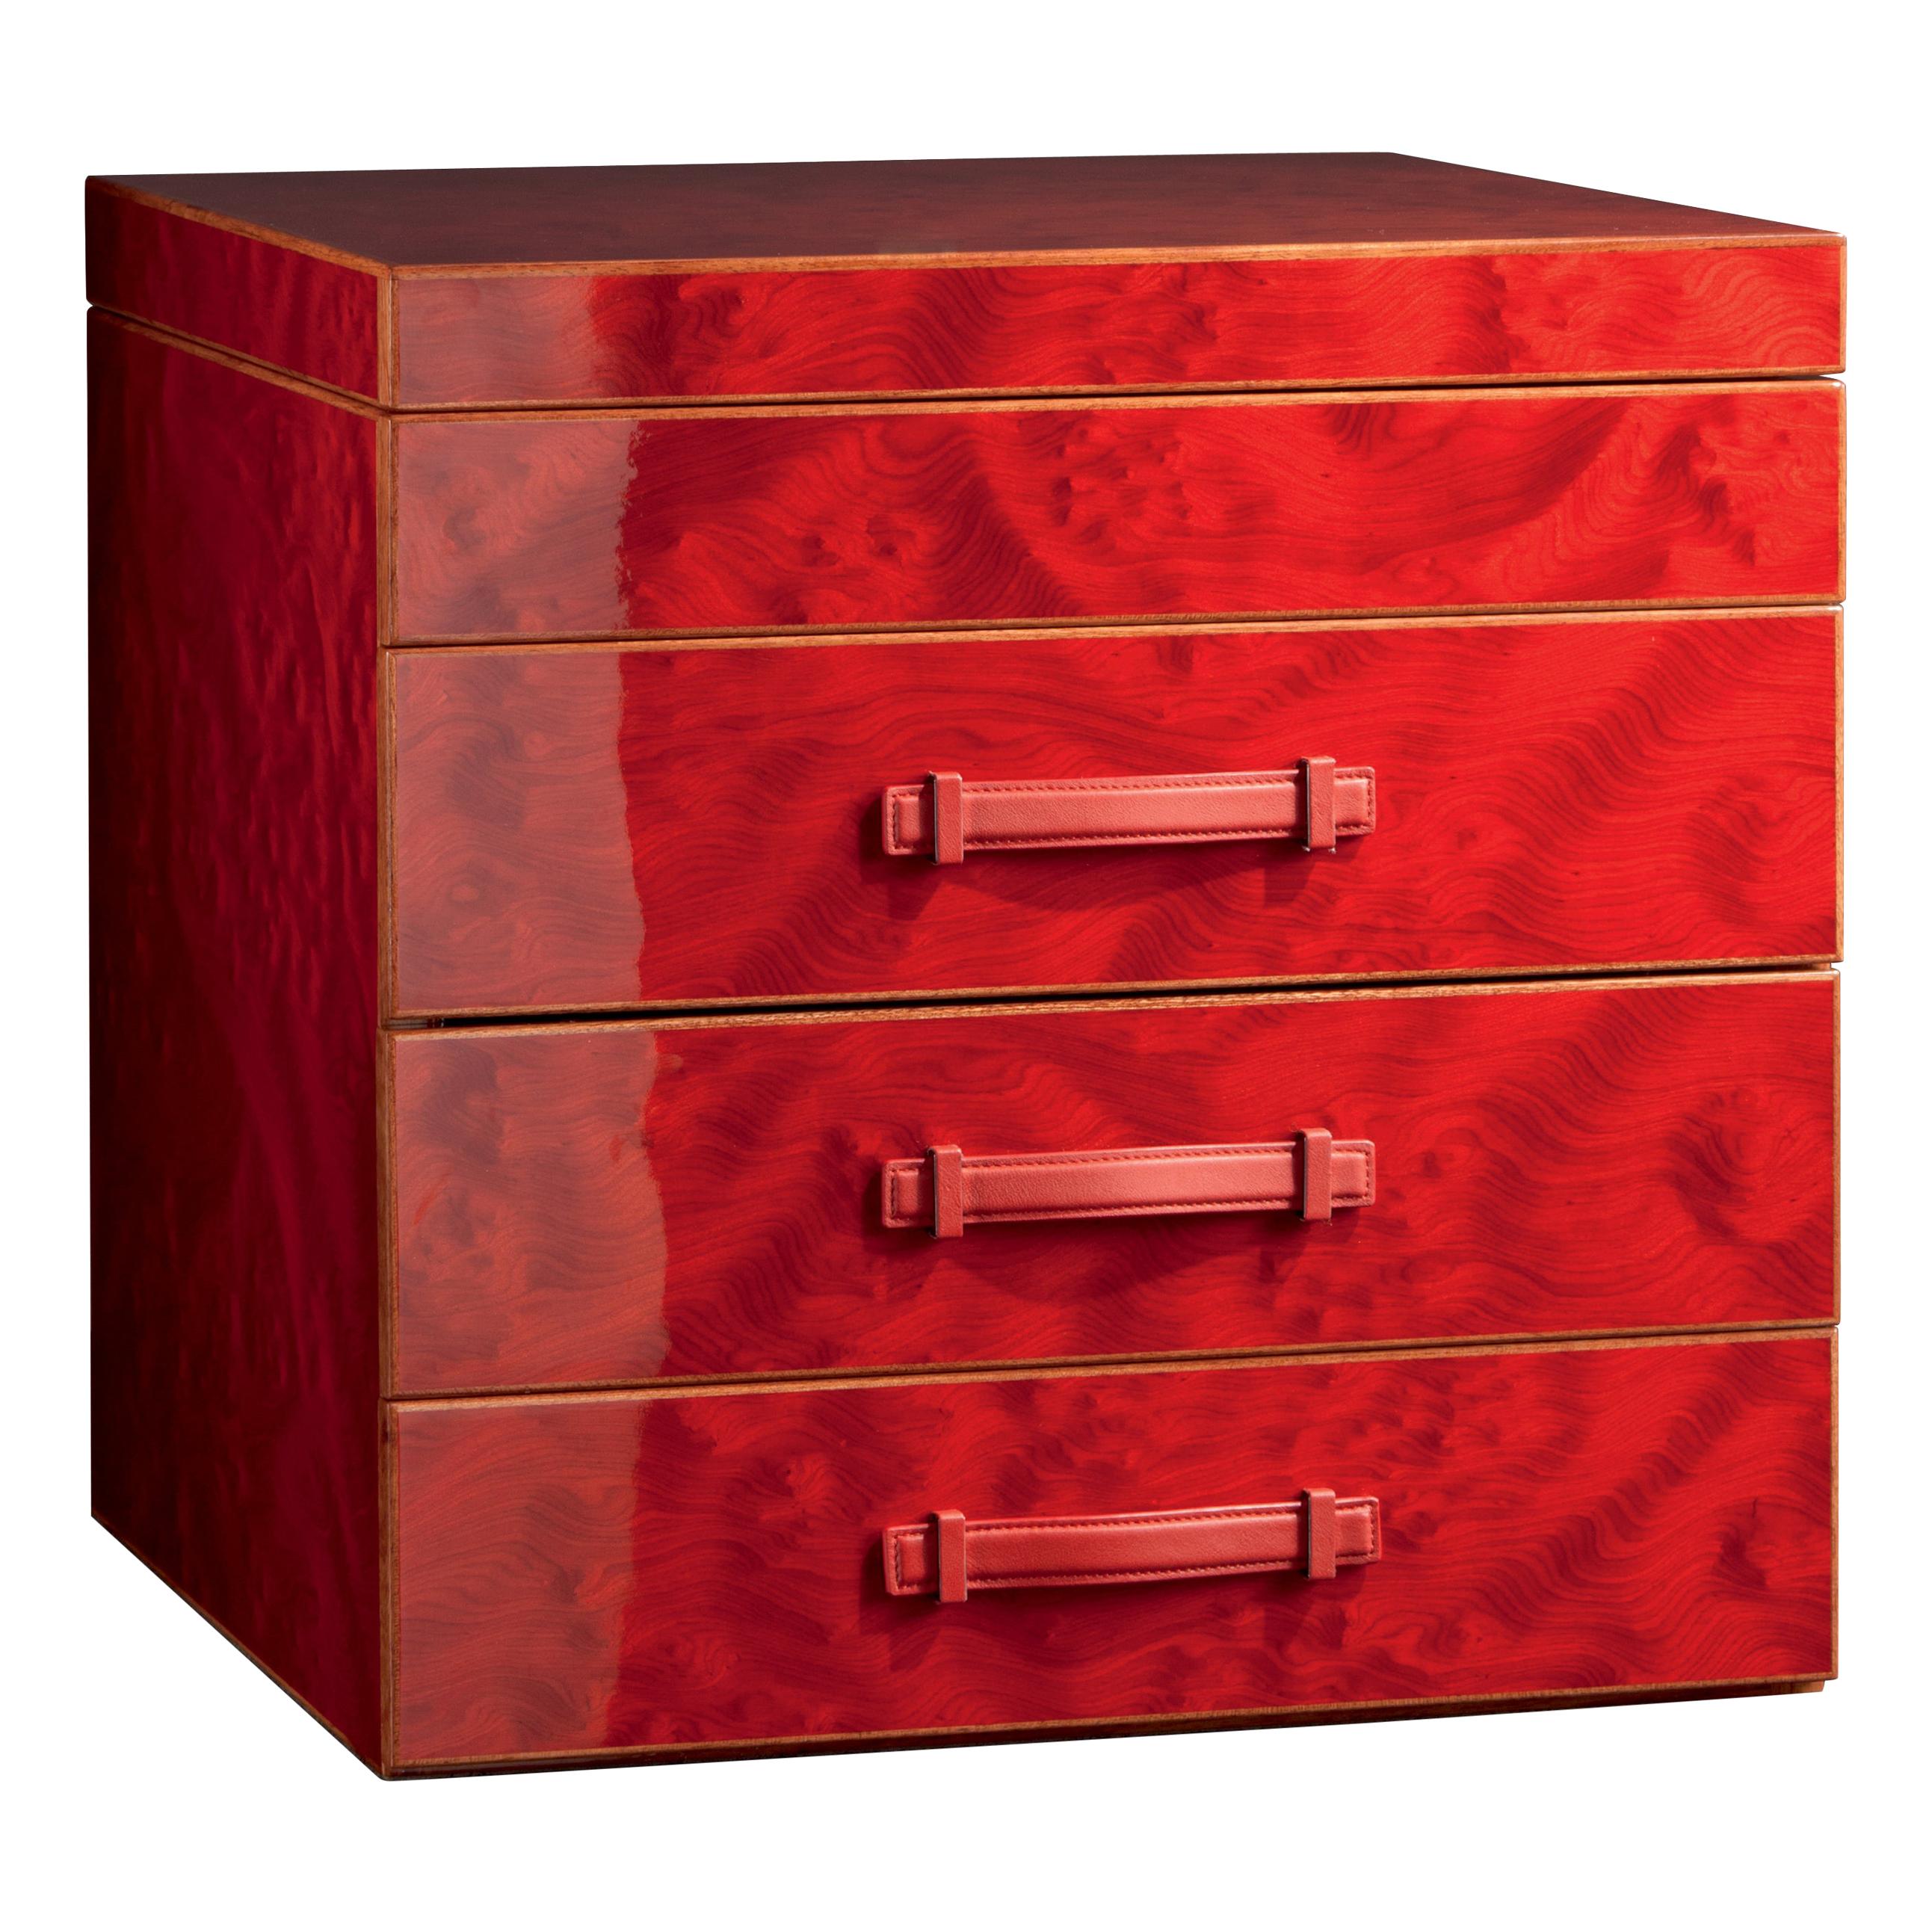 Multigame Set in Red Briar and Mahogany Casinò Passion by Agresti